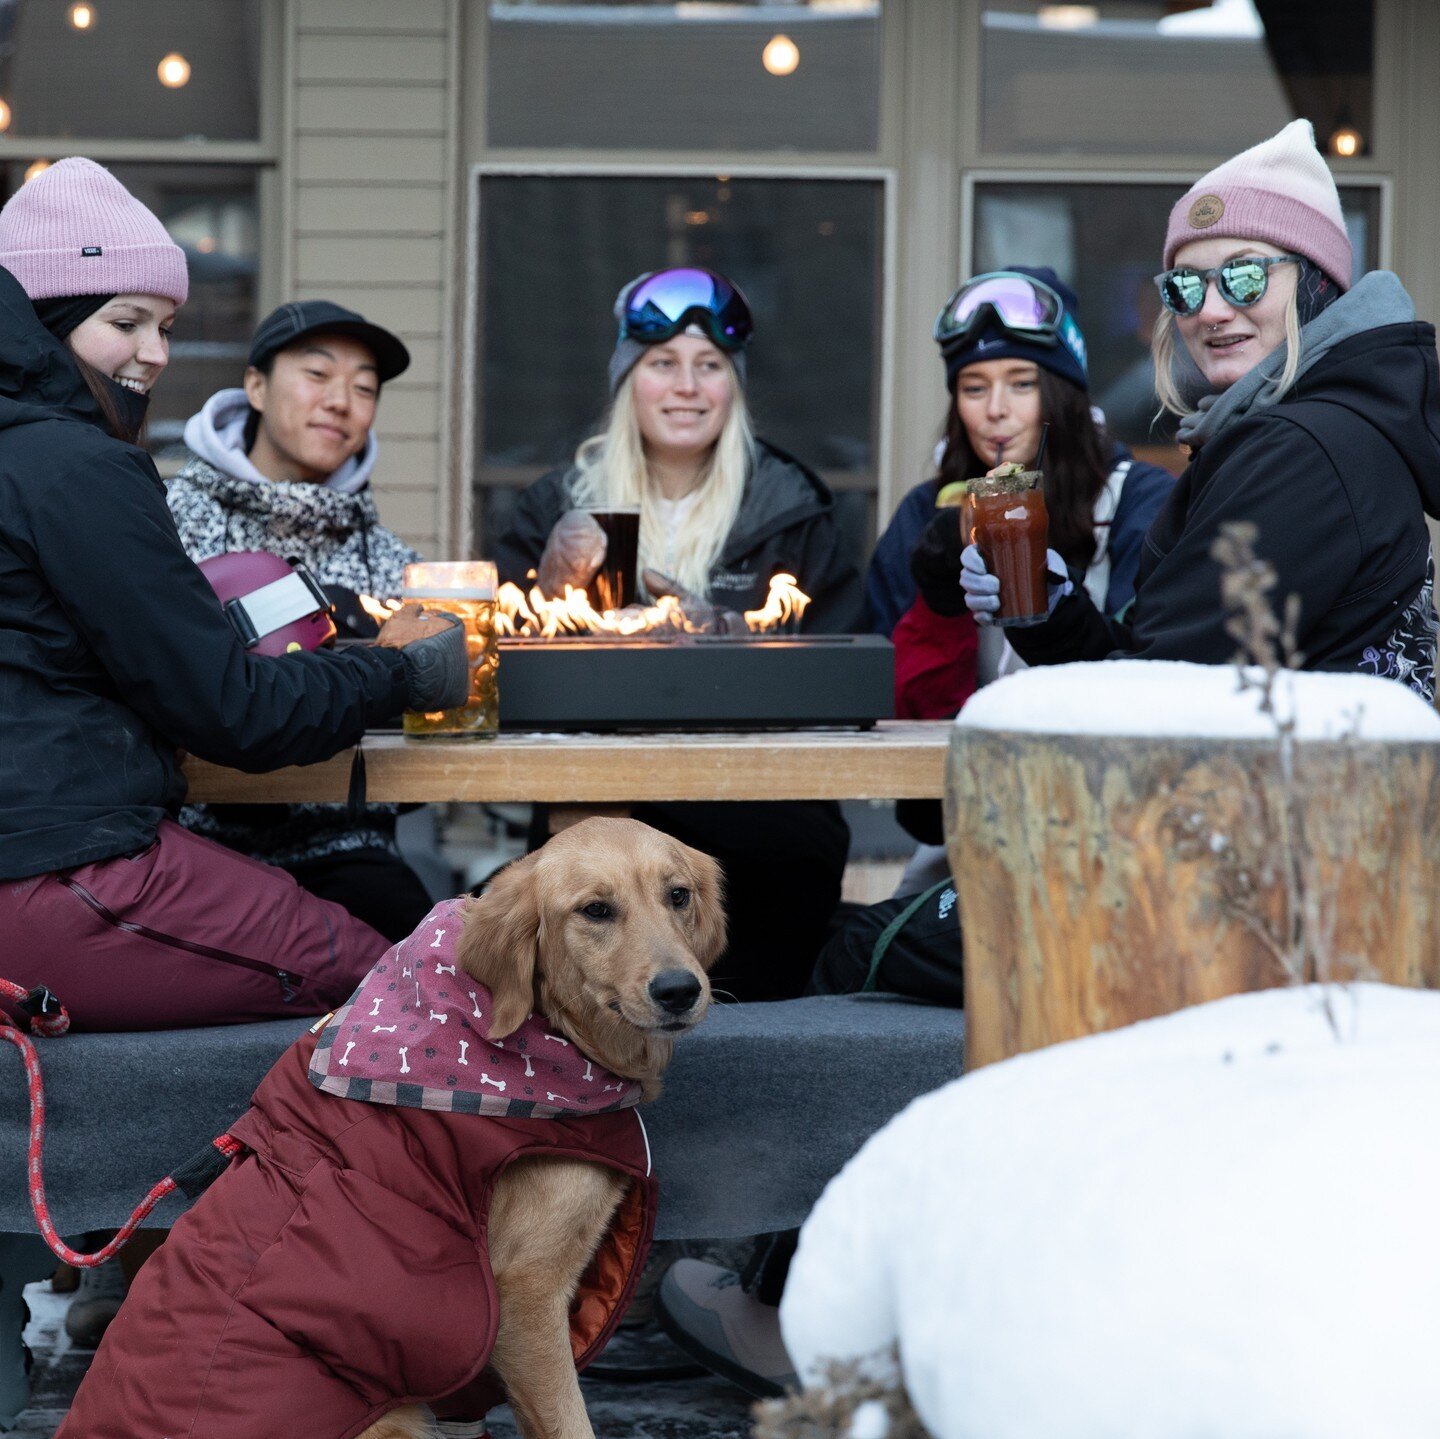 When your humans bring you to the patio Pizza party. 

#bearstreettavern #banffpizza #patio #winterpatio #dogpatio #banff #pupsonpatios